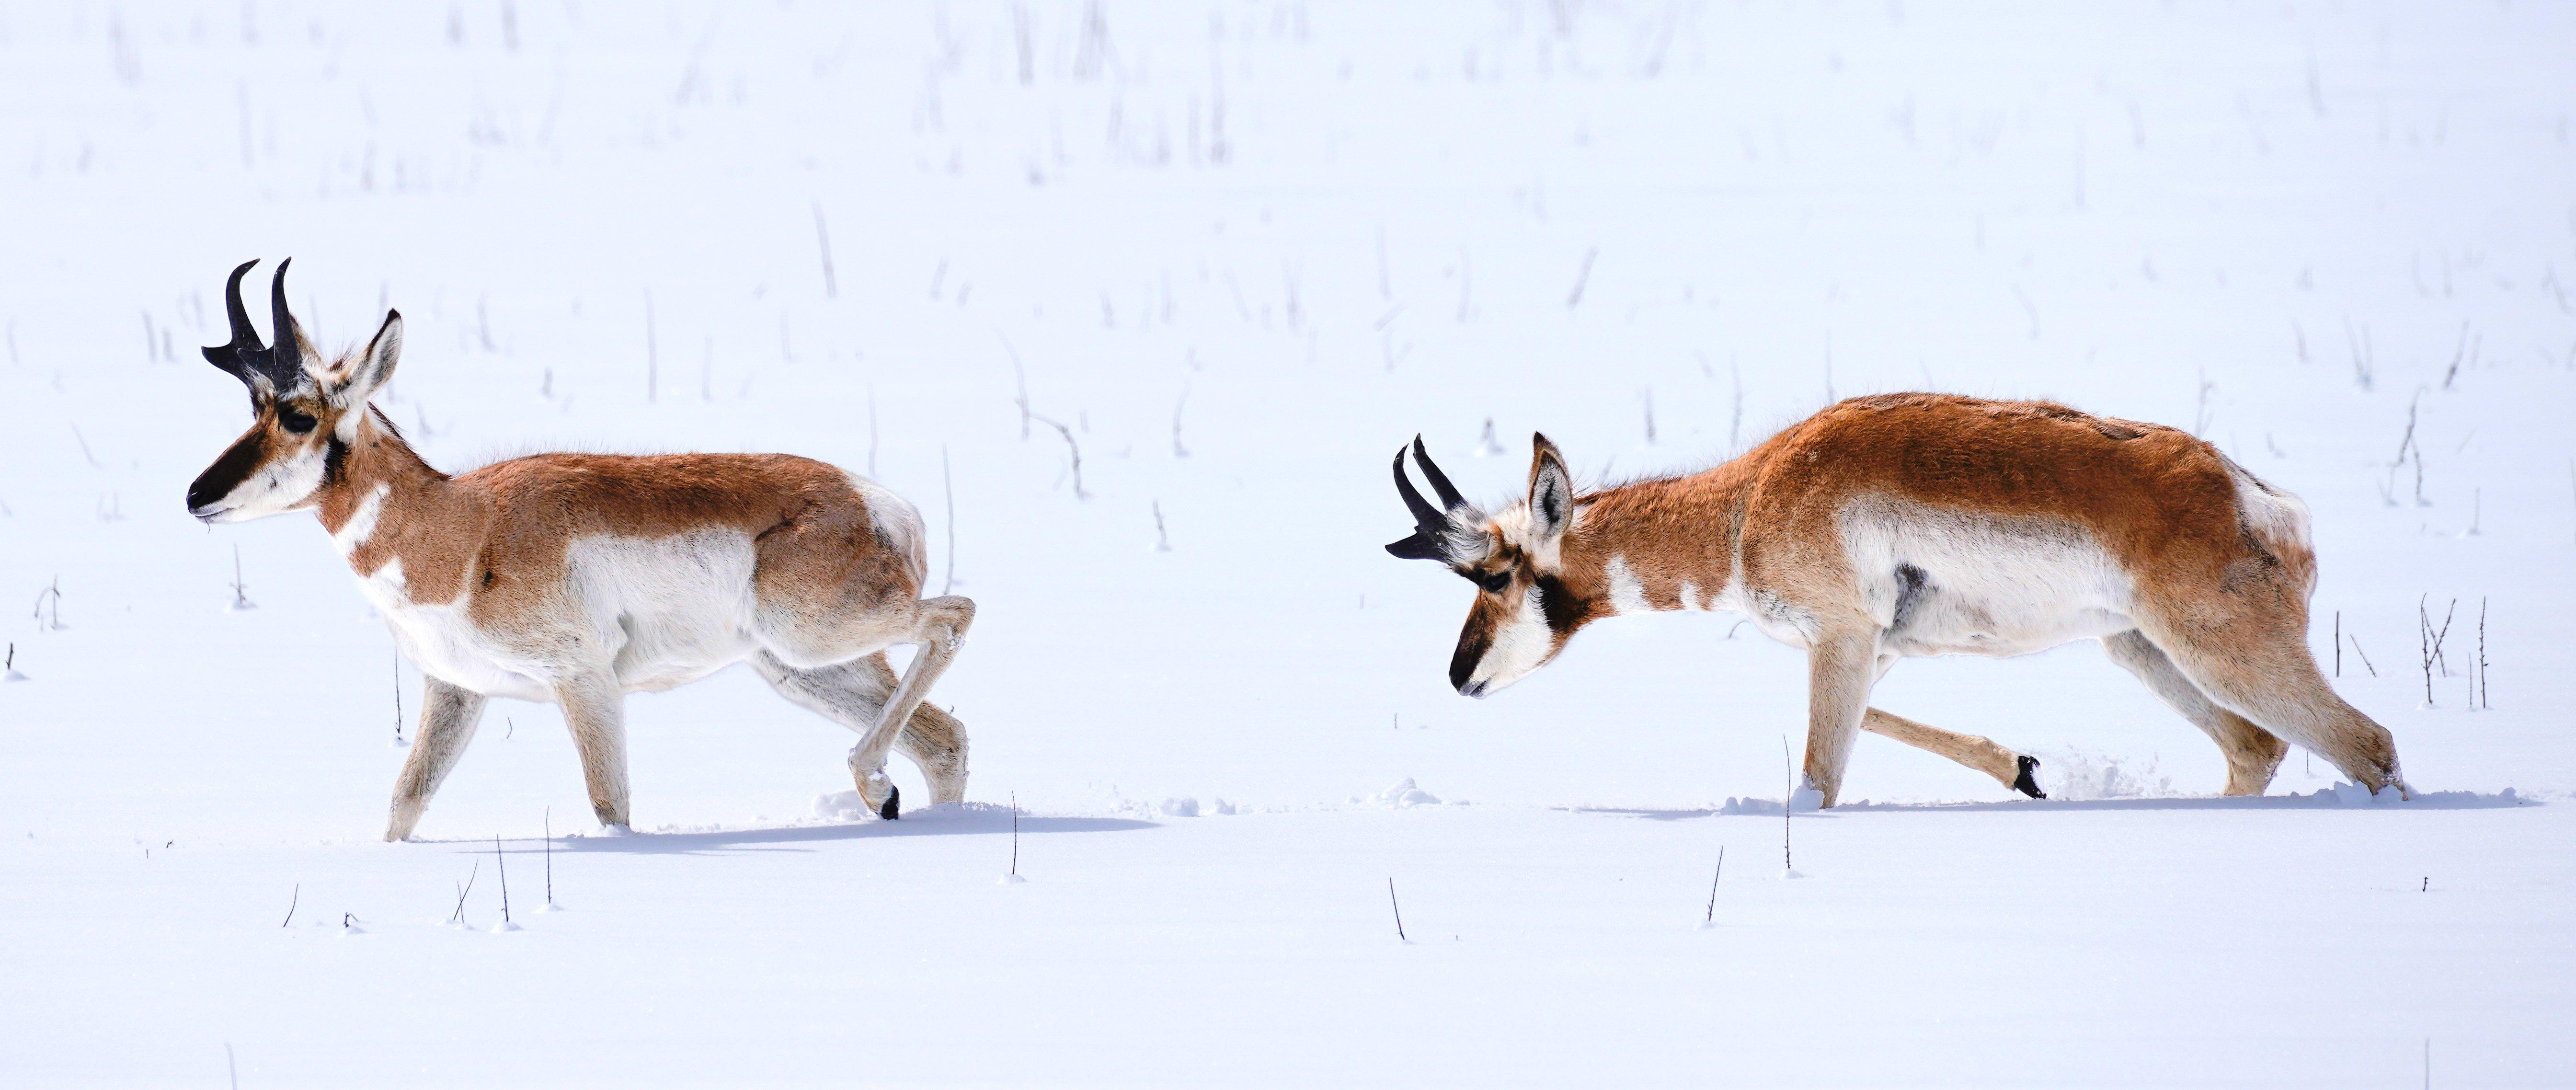 Extreme winter conditions are causing significant wildlife mortality in Wyoming and Colorado. Image by Moment of Perception